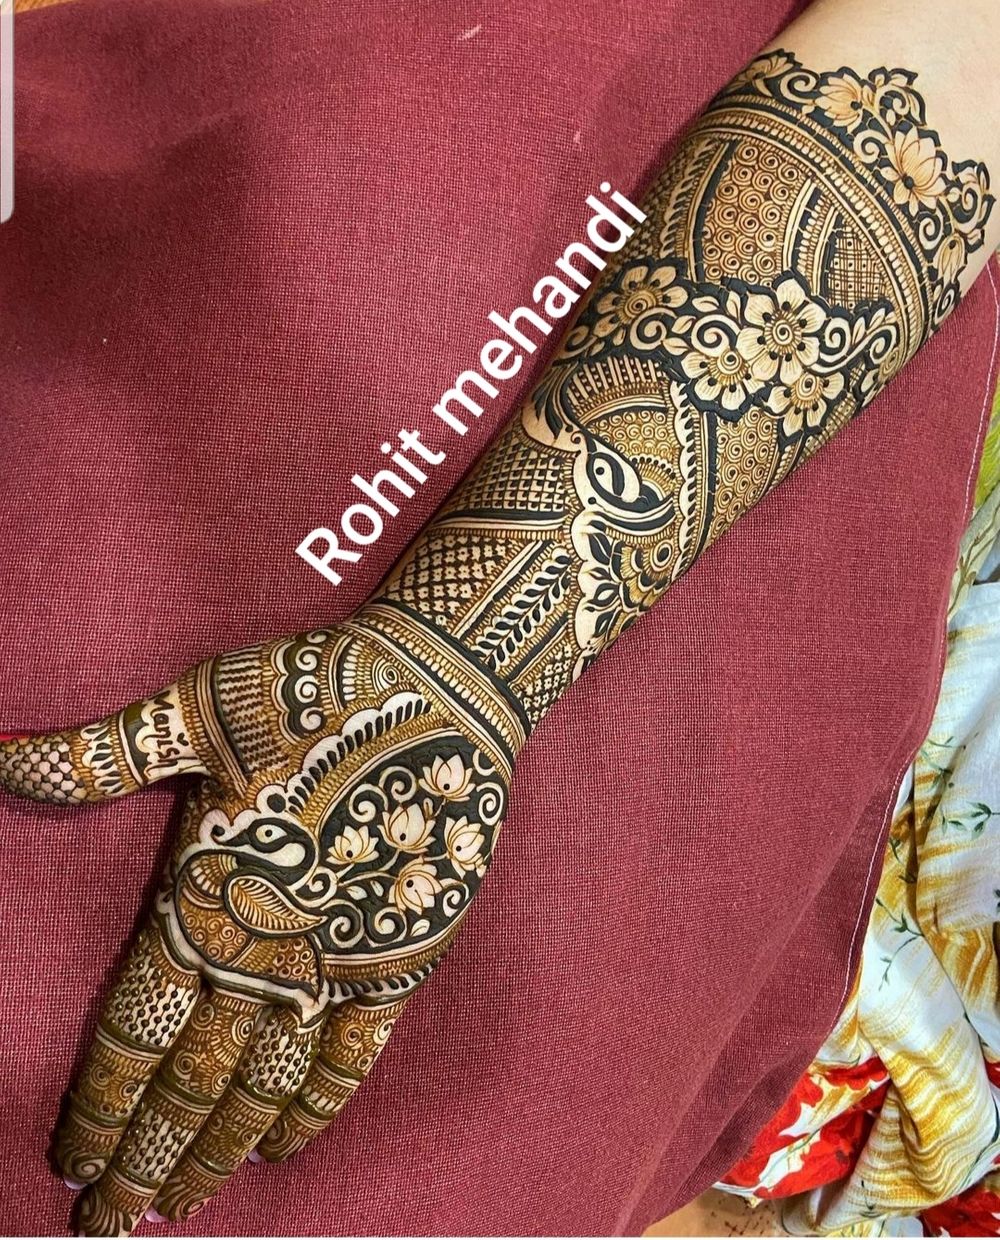 Photo From guest's  mehandi - By Rohit Mehandi Professional